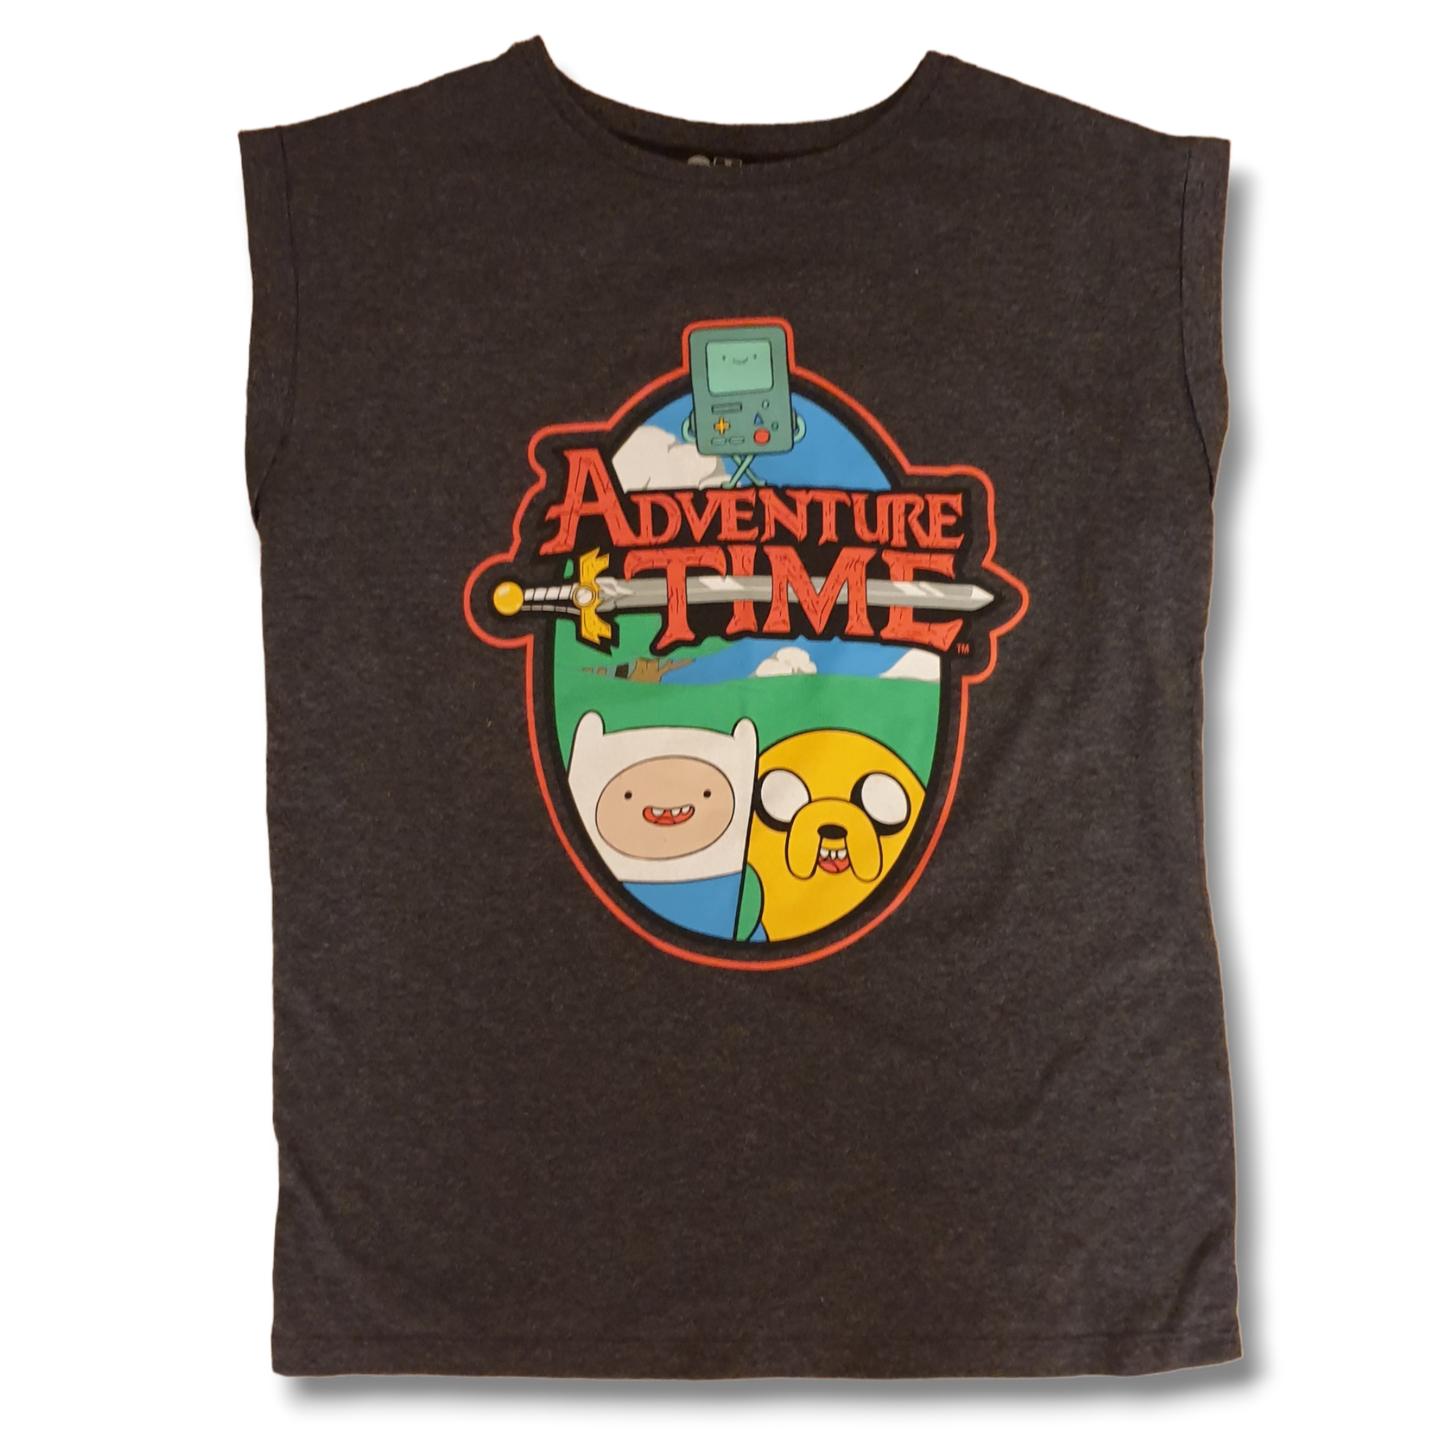 Adventure Time No sleeves T-Shirt XS